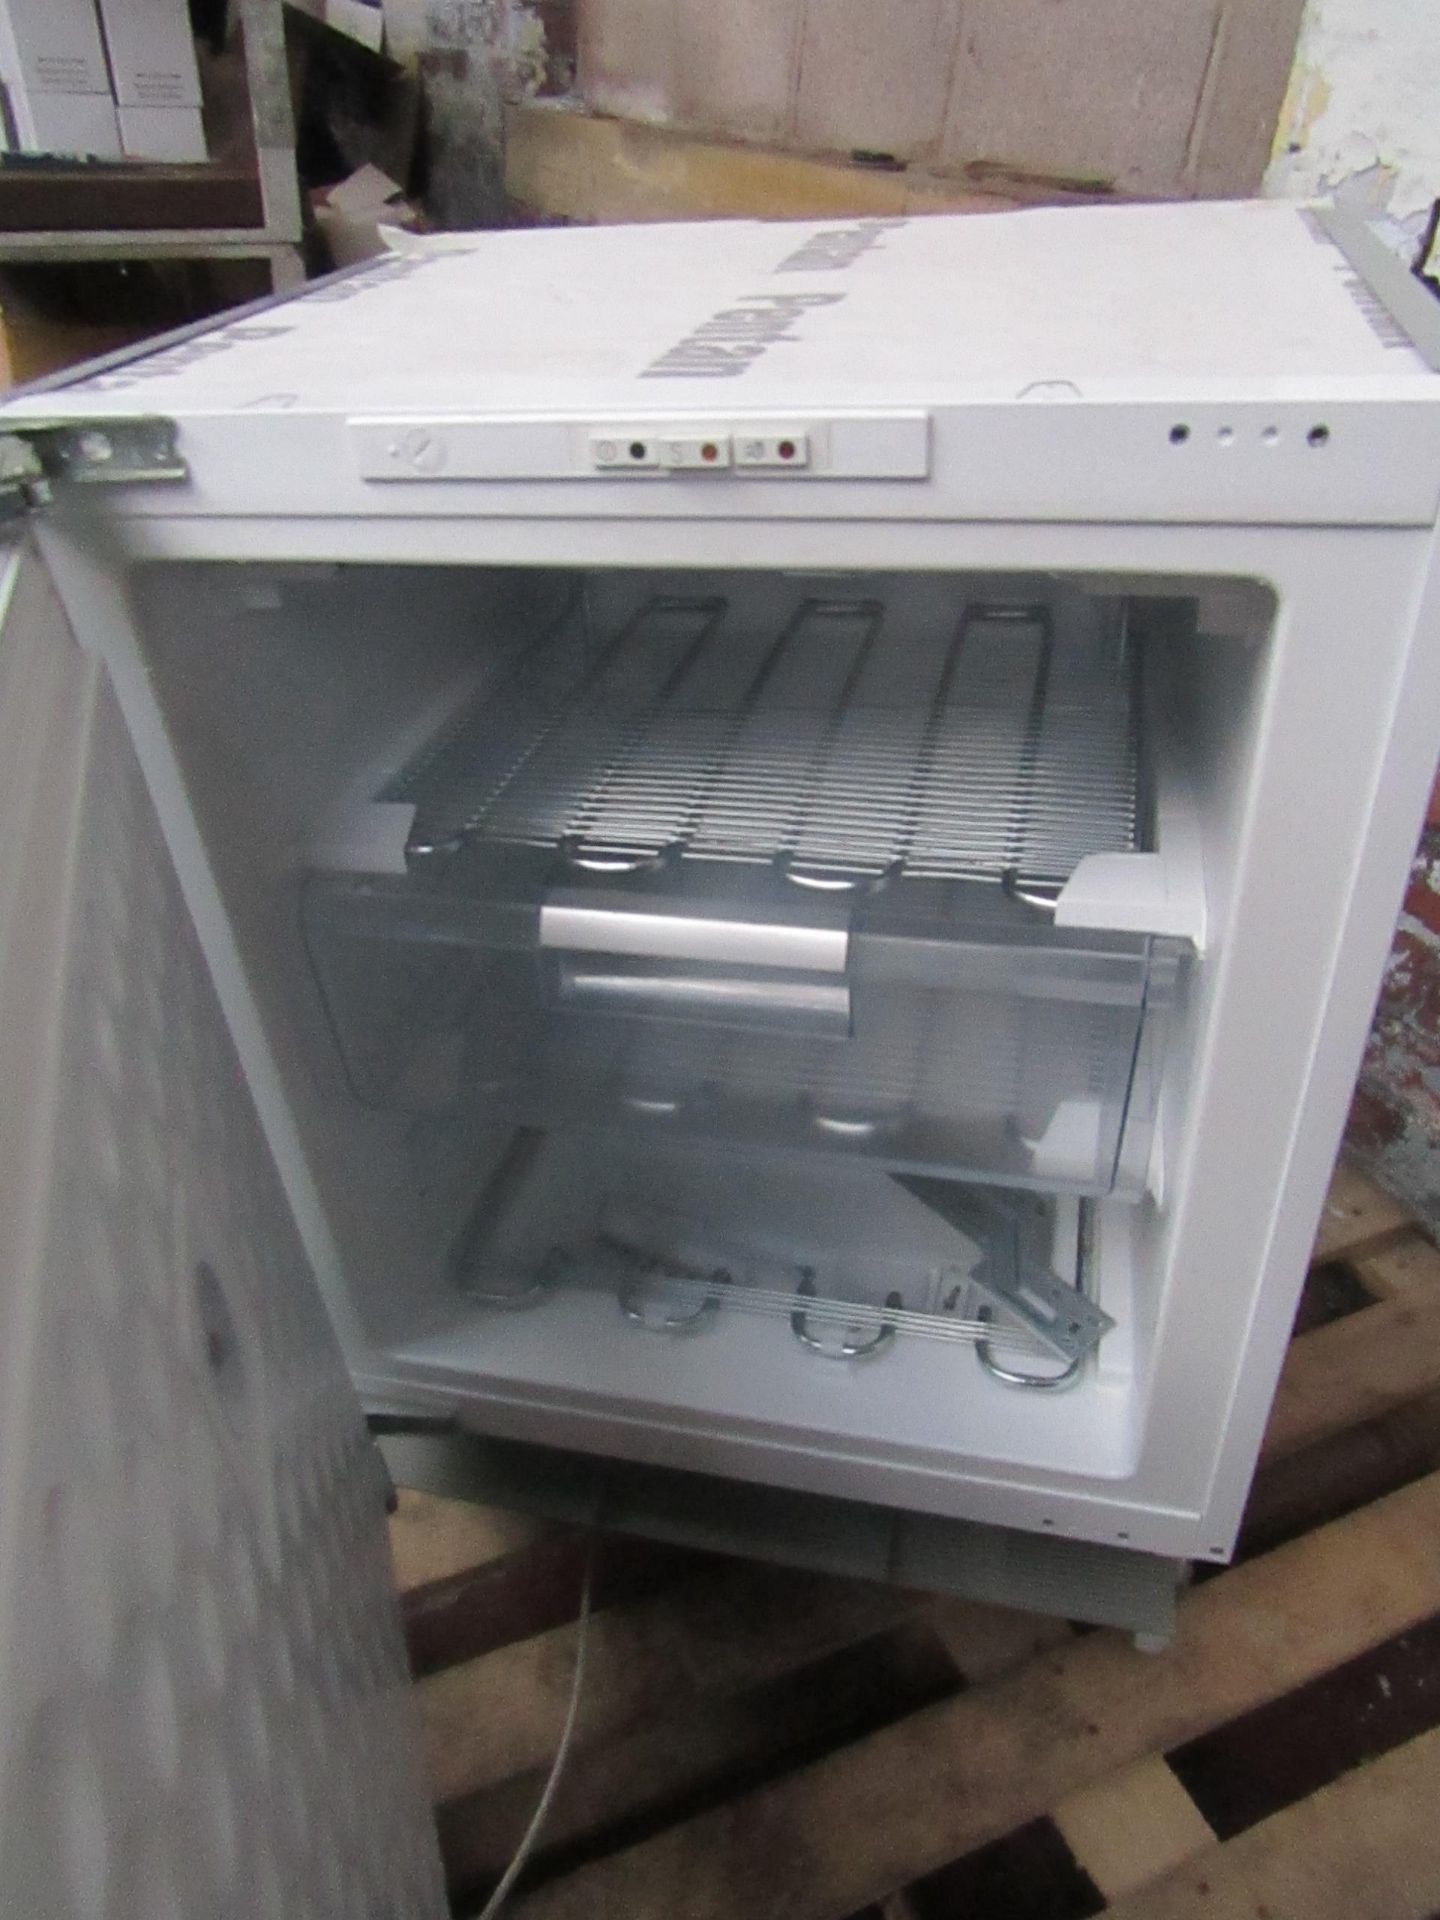 Neff intergrated under-counter .freezer, tested working, the plastic drawer front is cracked and - Image 2 of 2